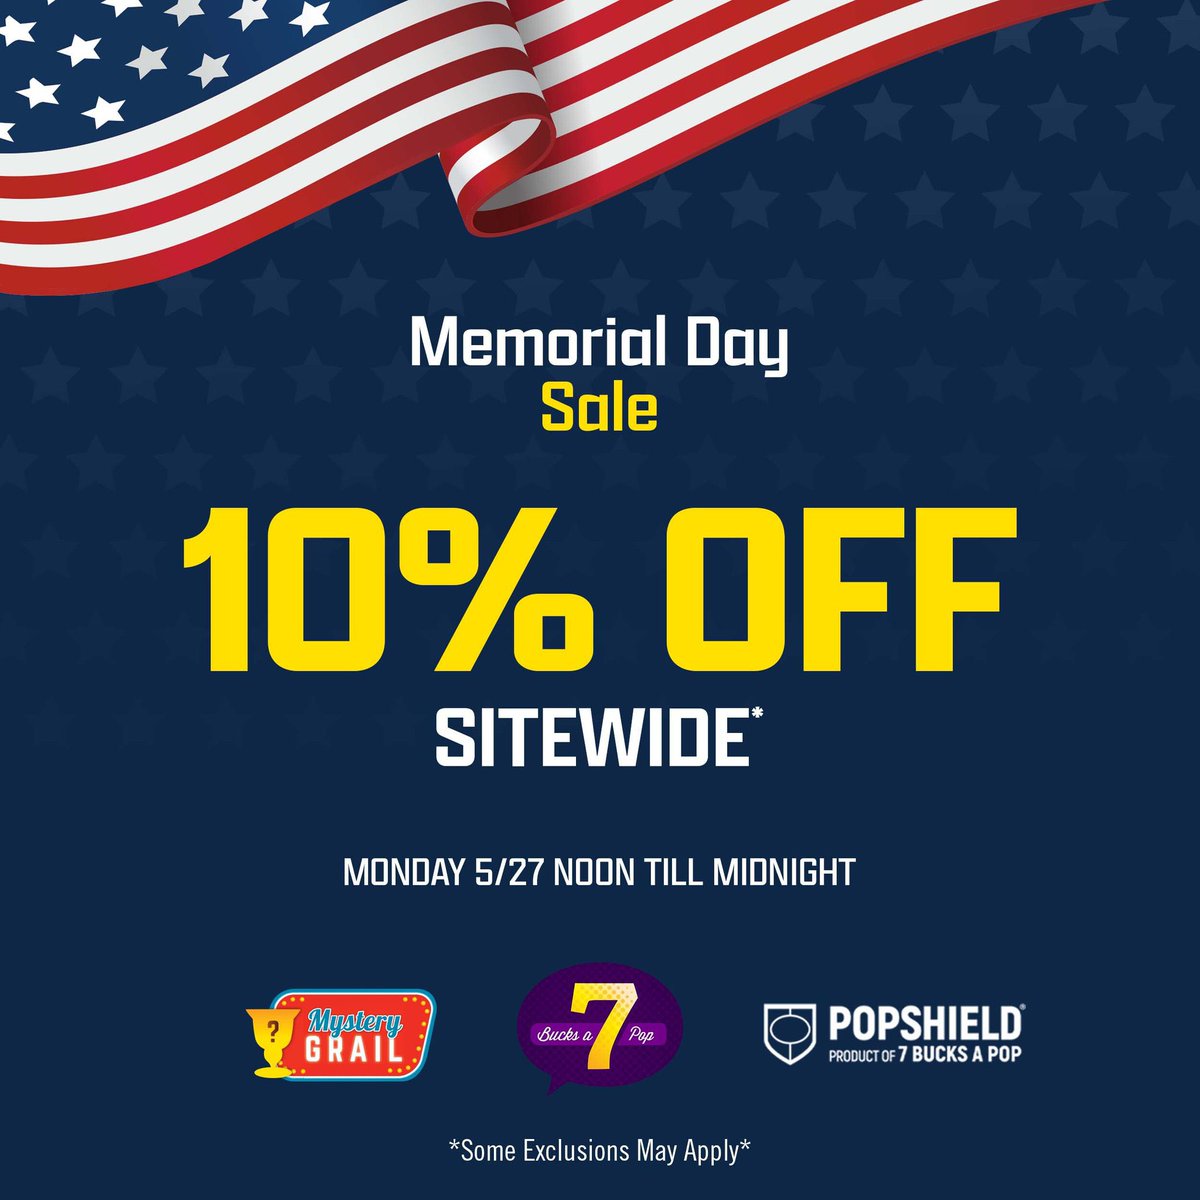 Memorial Day Sale 🚨- 10% off Sitewide at PopShield, 7 Bucks A Pop, & Mystery Grail! #Ad #Funko #Collectibles . popshield.shop 7bucksapop.com Mysterygrail.com @7BucksAPop